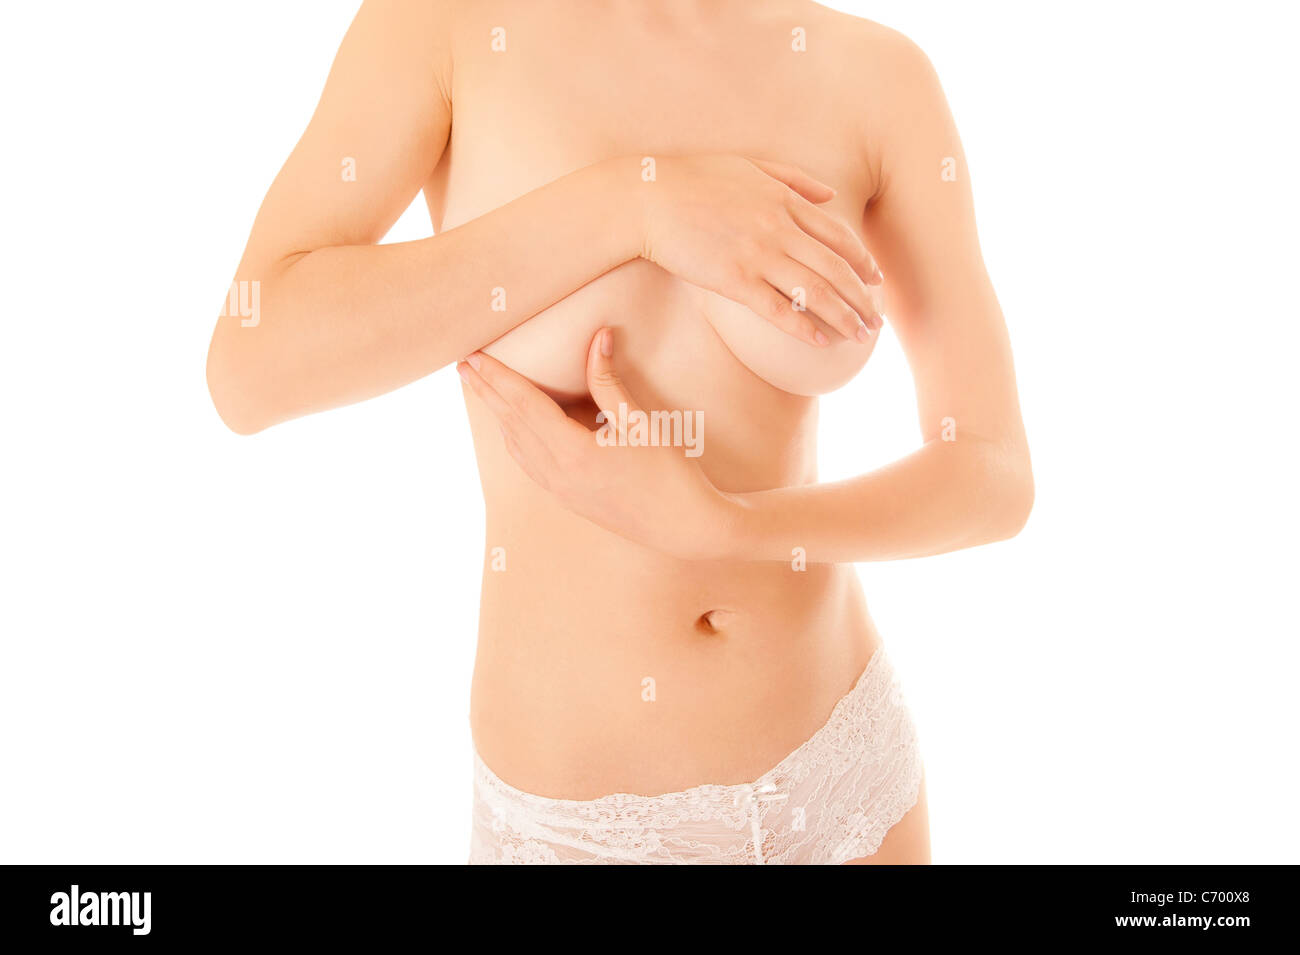 https://c8.alamy.com/comp/C700X8/beautiful-young-woman-in-white-panties-examining-her-breasts-for-lumps-C700X8.jpg